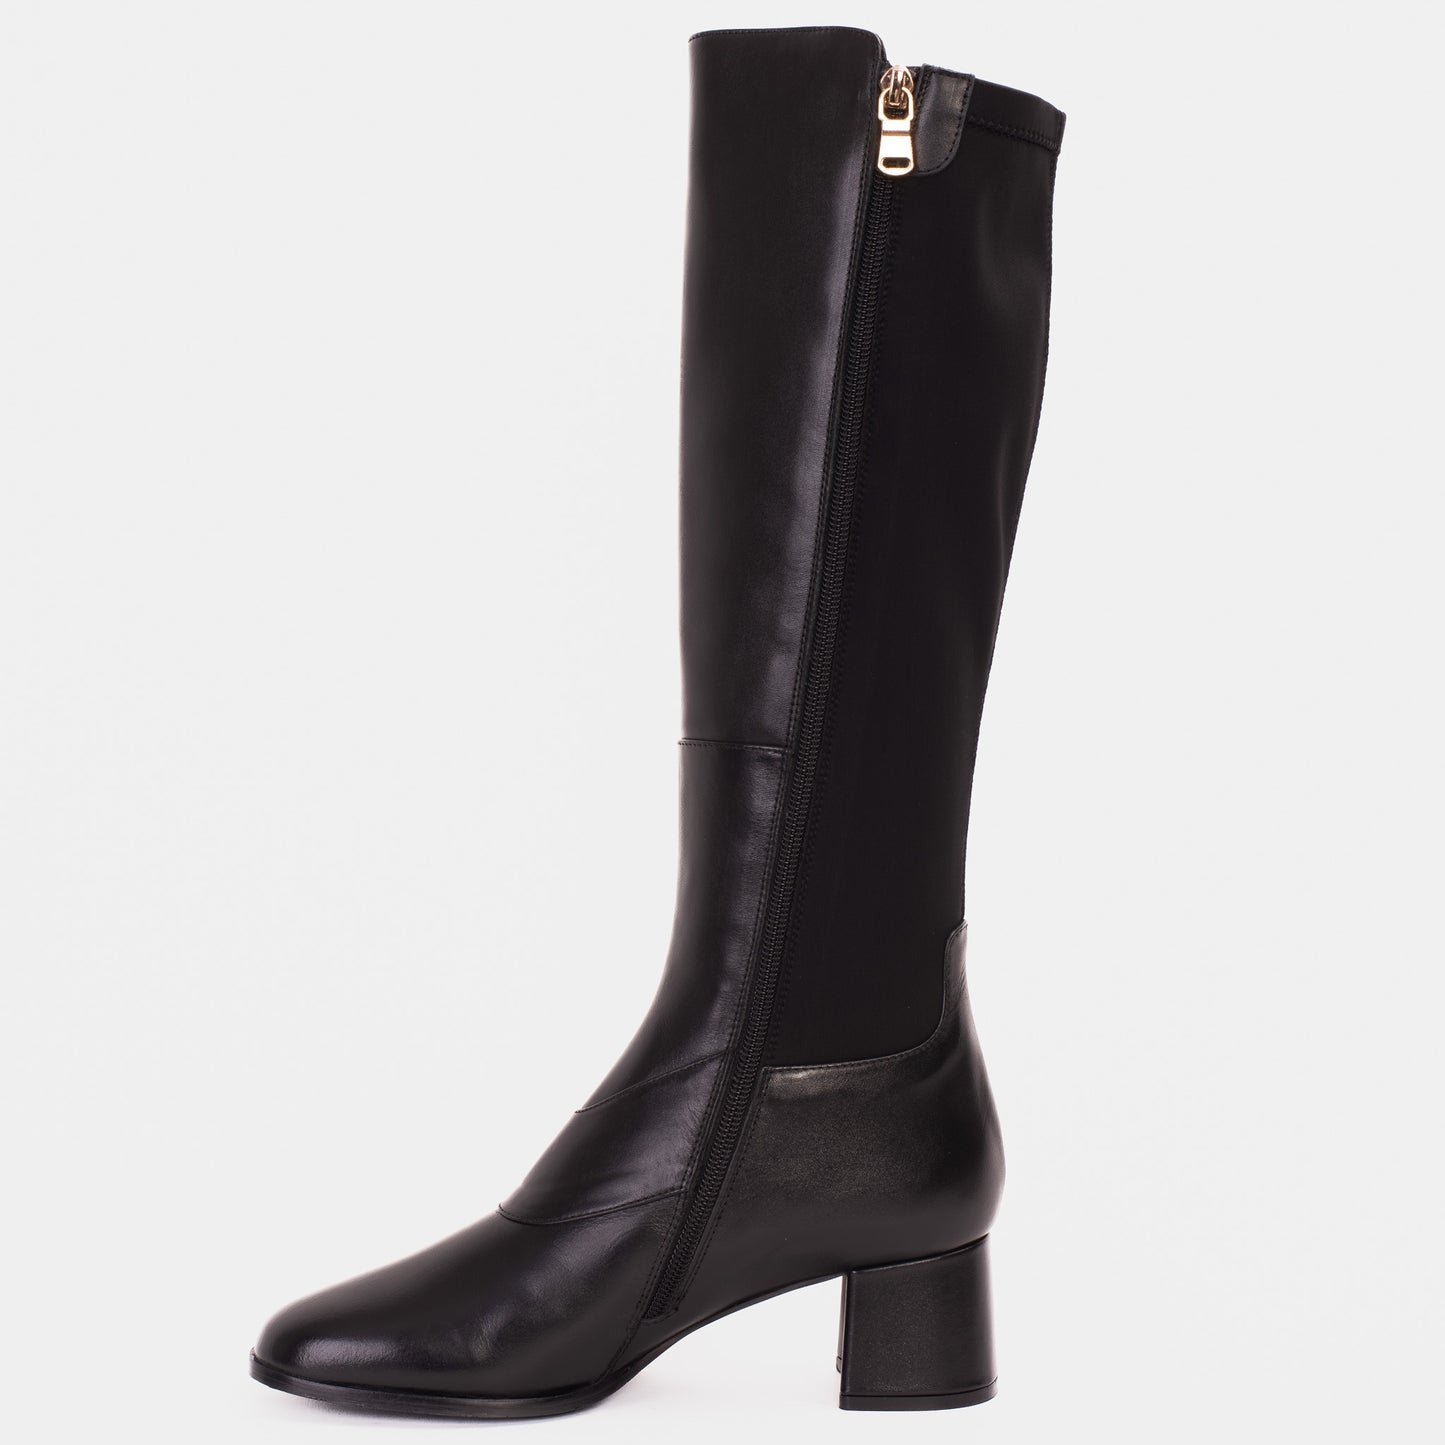 The Windsor Black Leather Knee High Women Boot